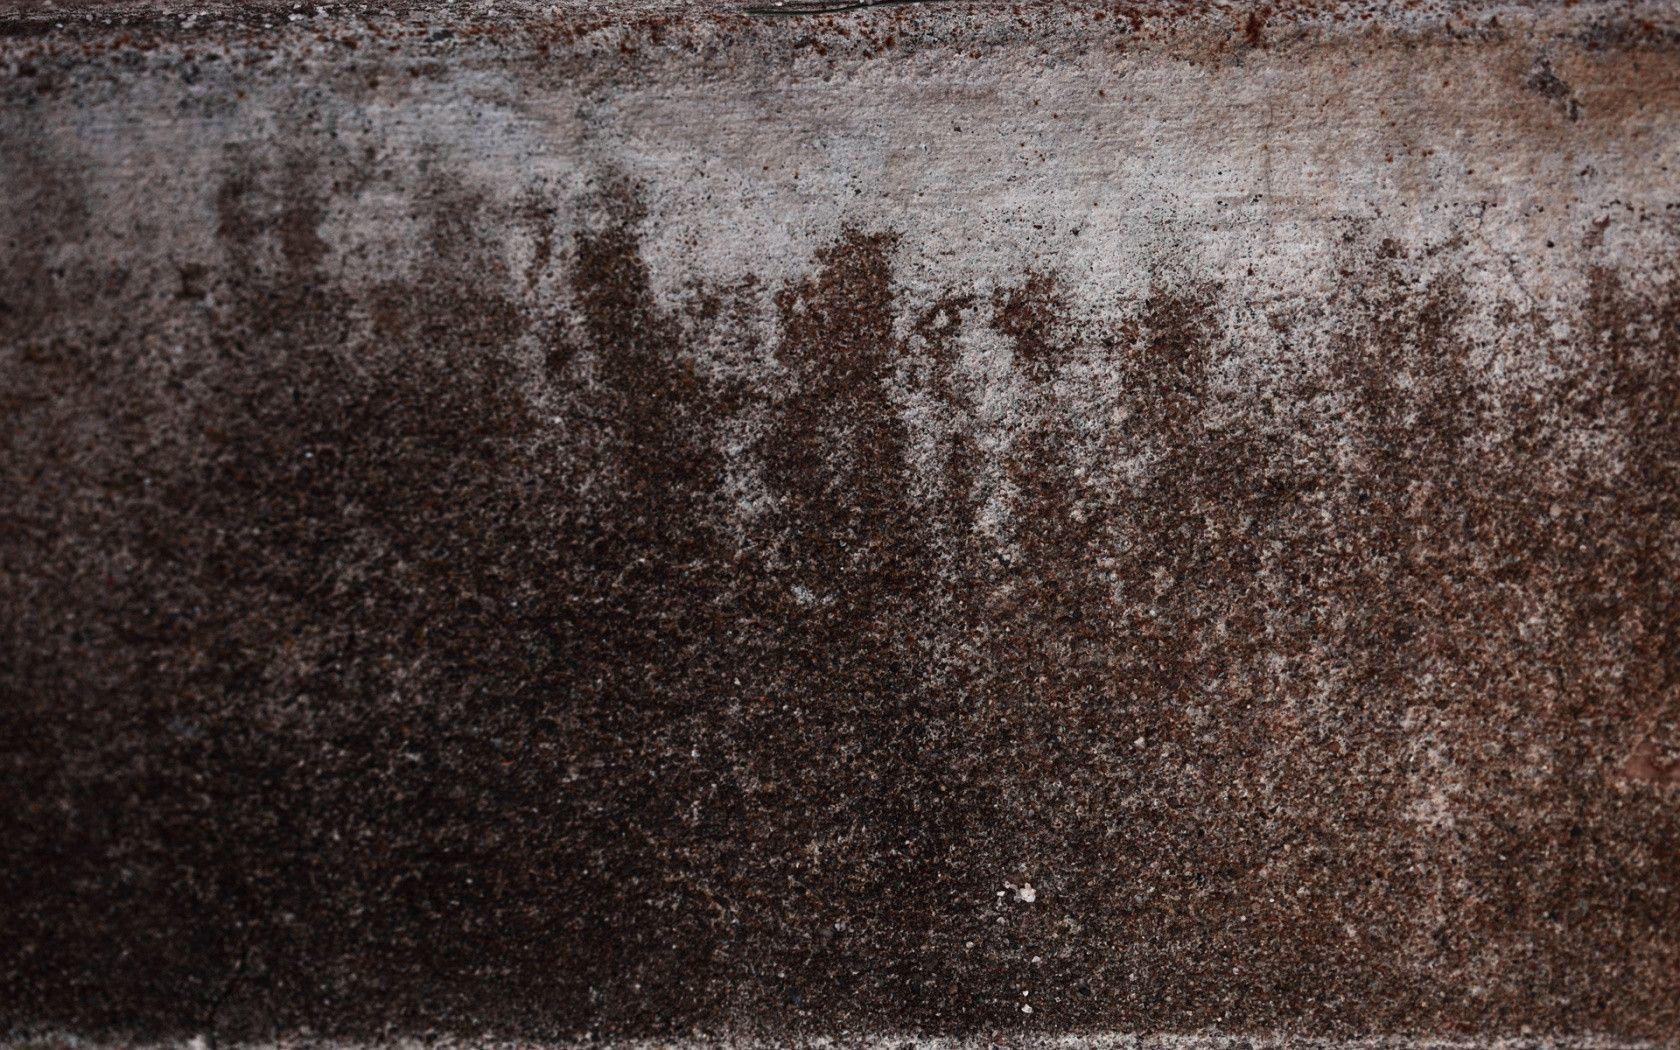 Dark and Dirty Stained Cement Texture 1680x1050 Wallpaper